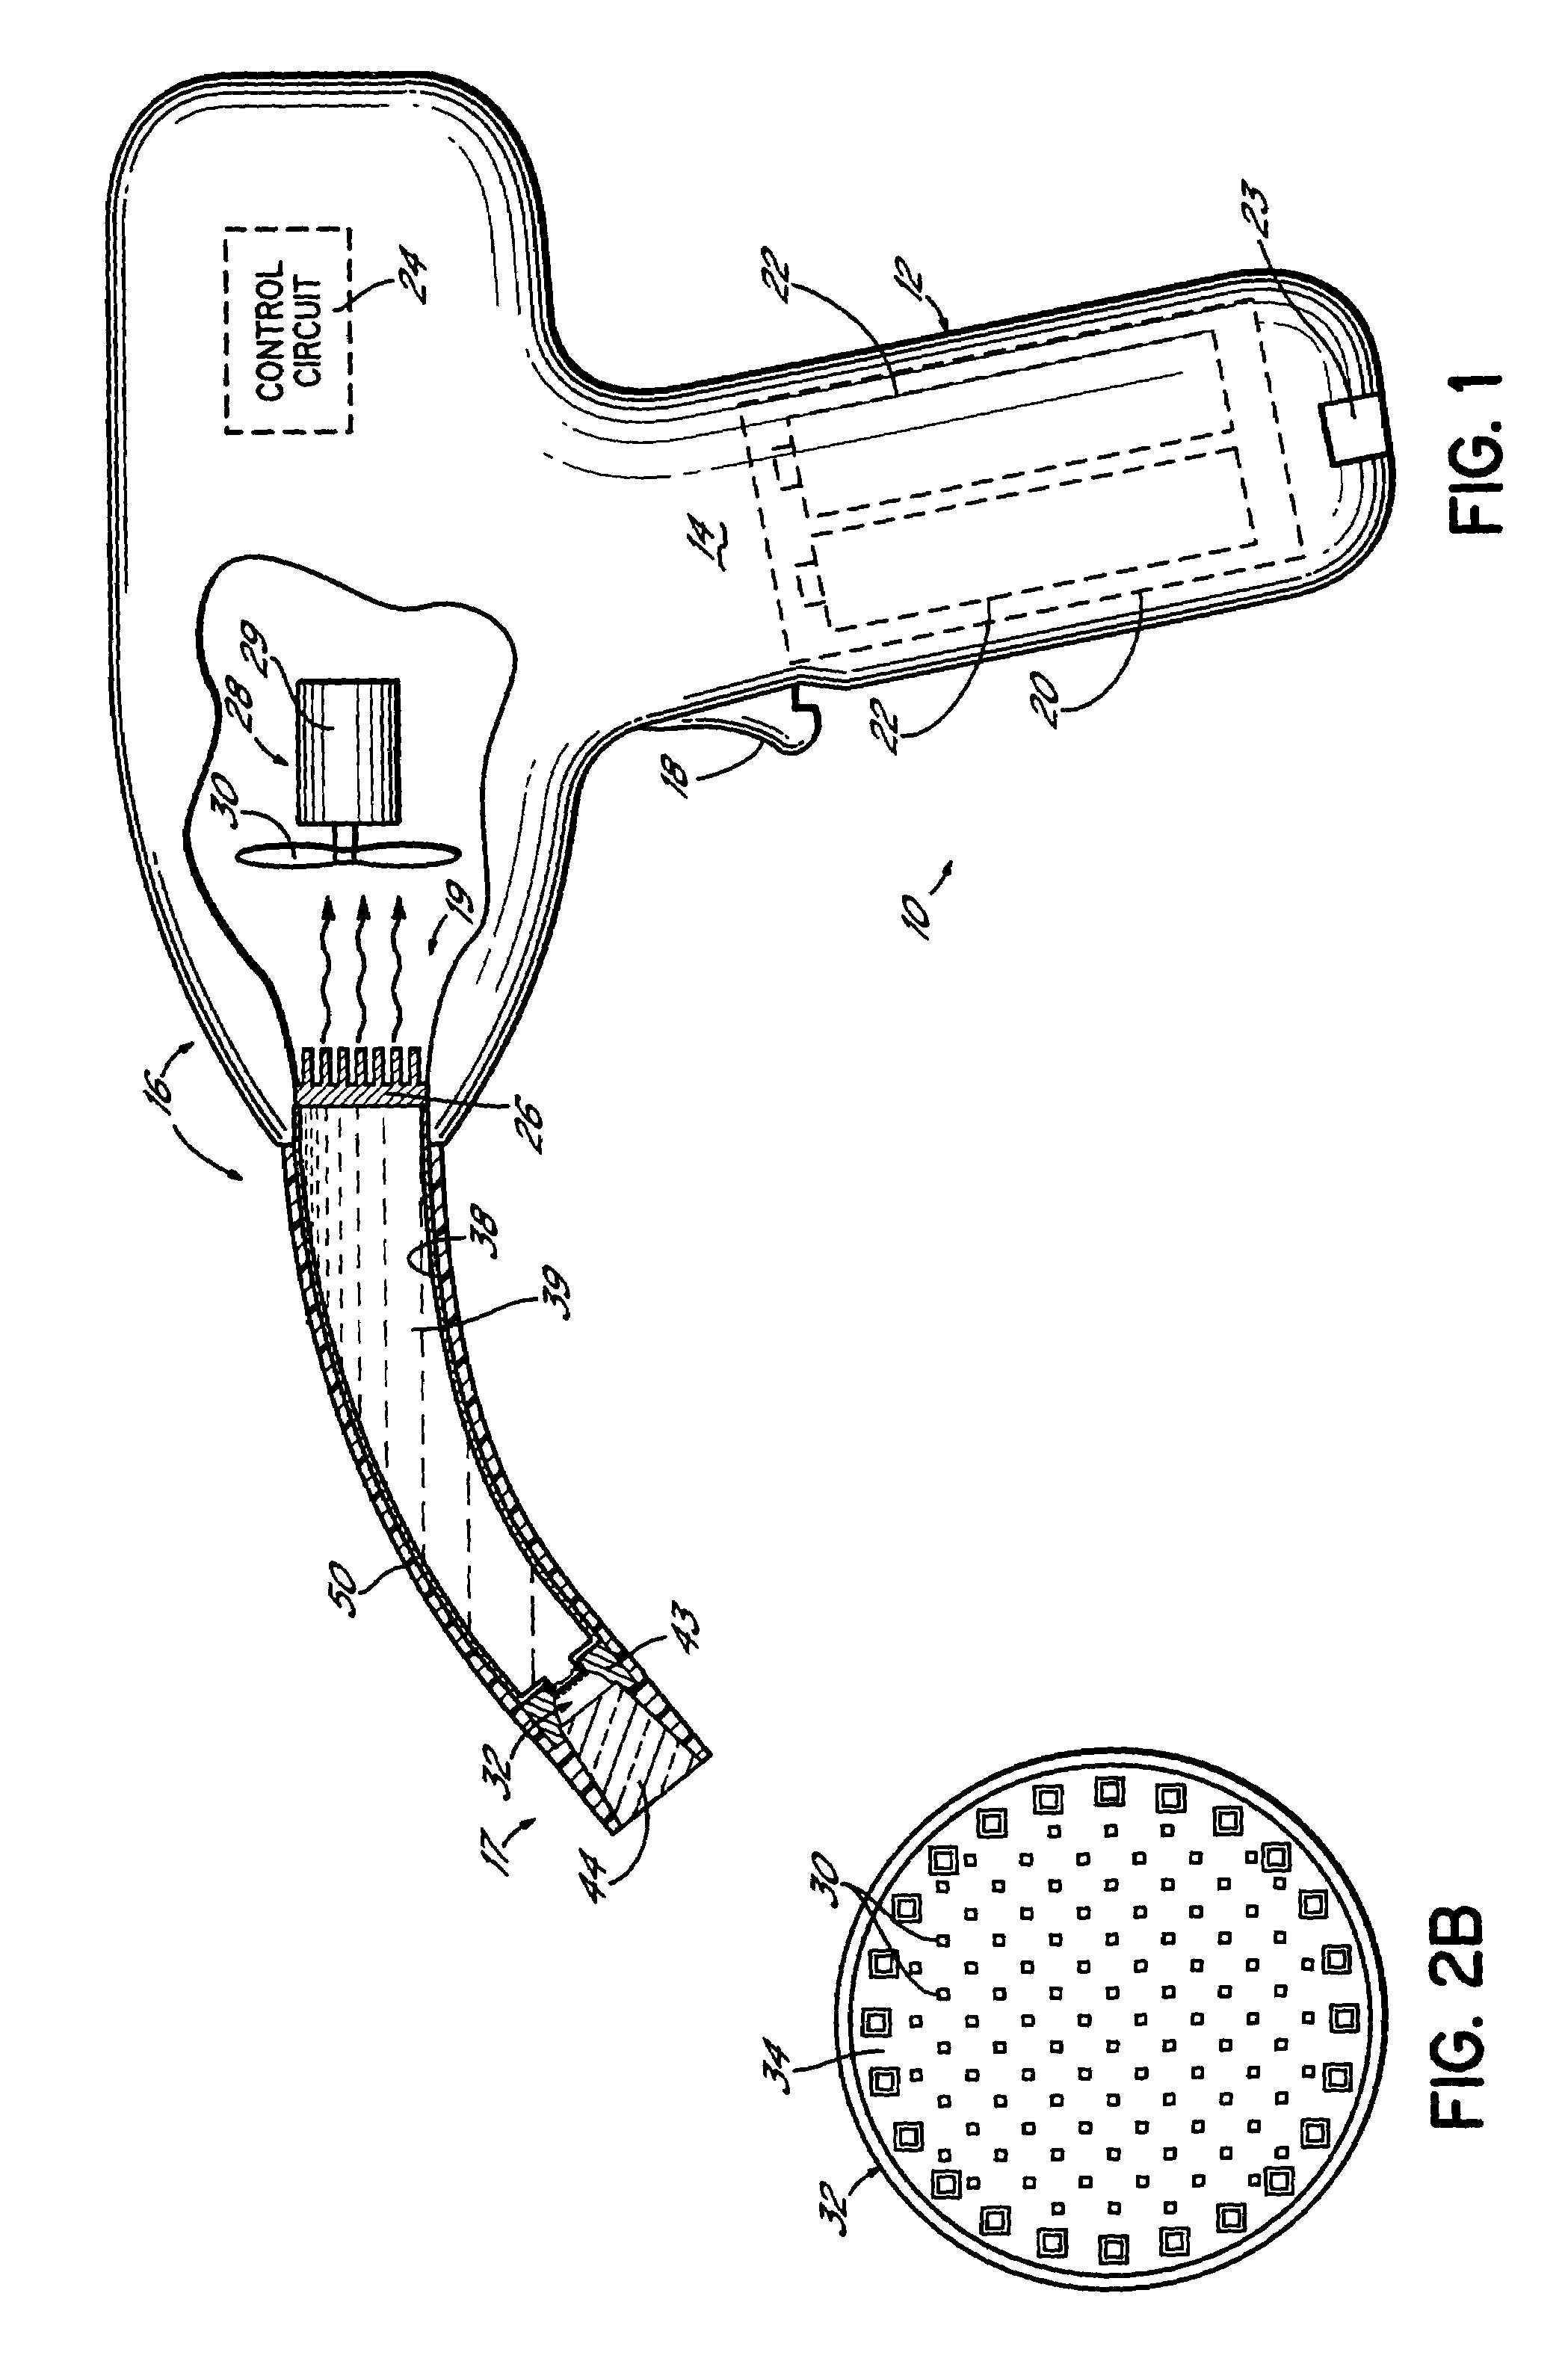 Apparatus and method for curing materials with light radiation